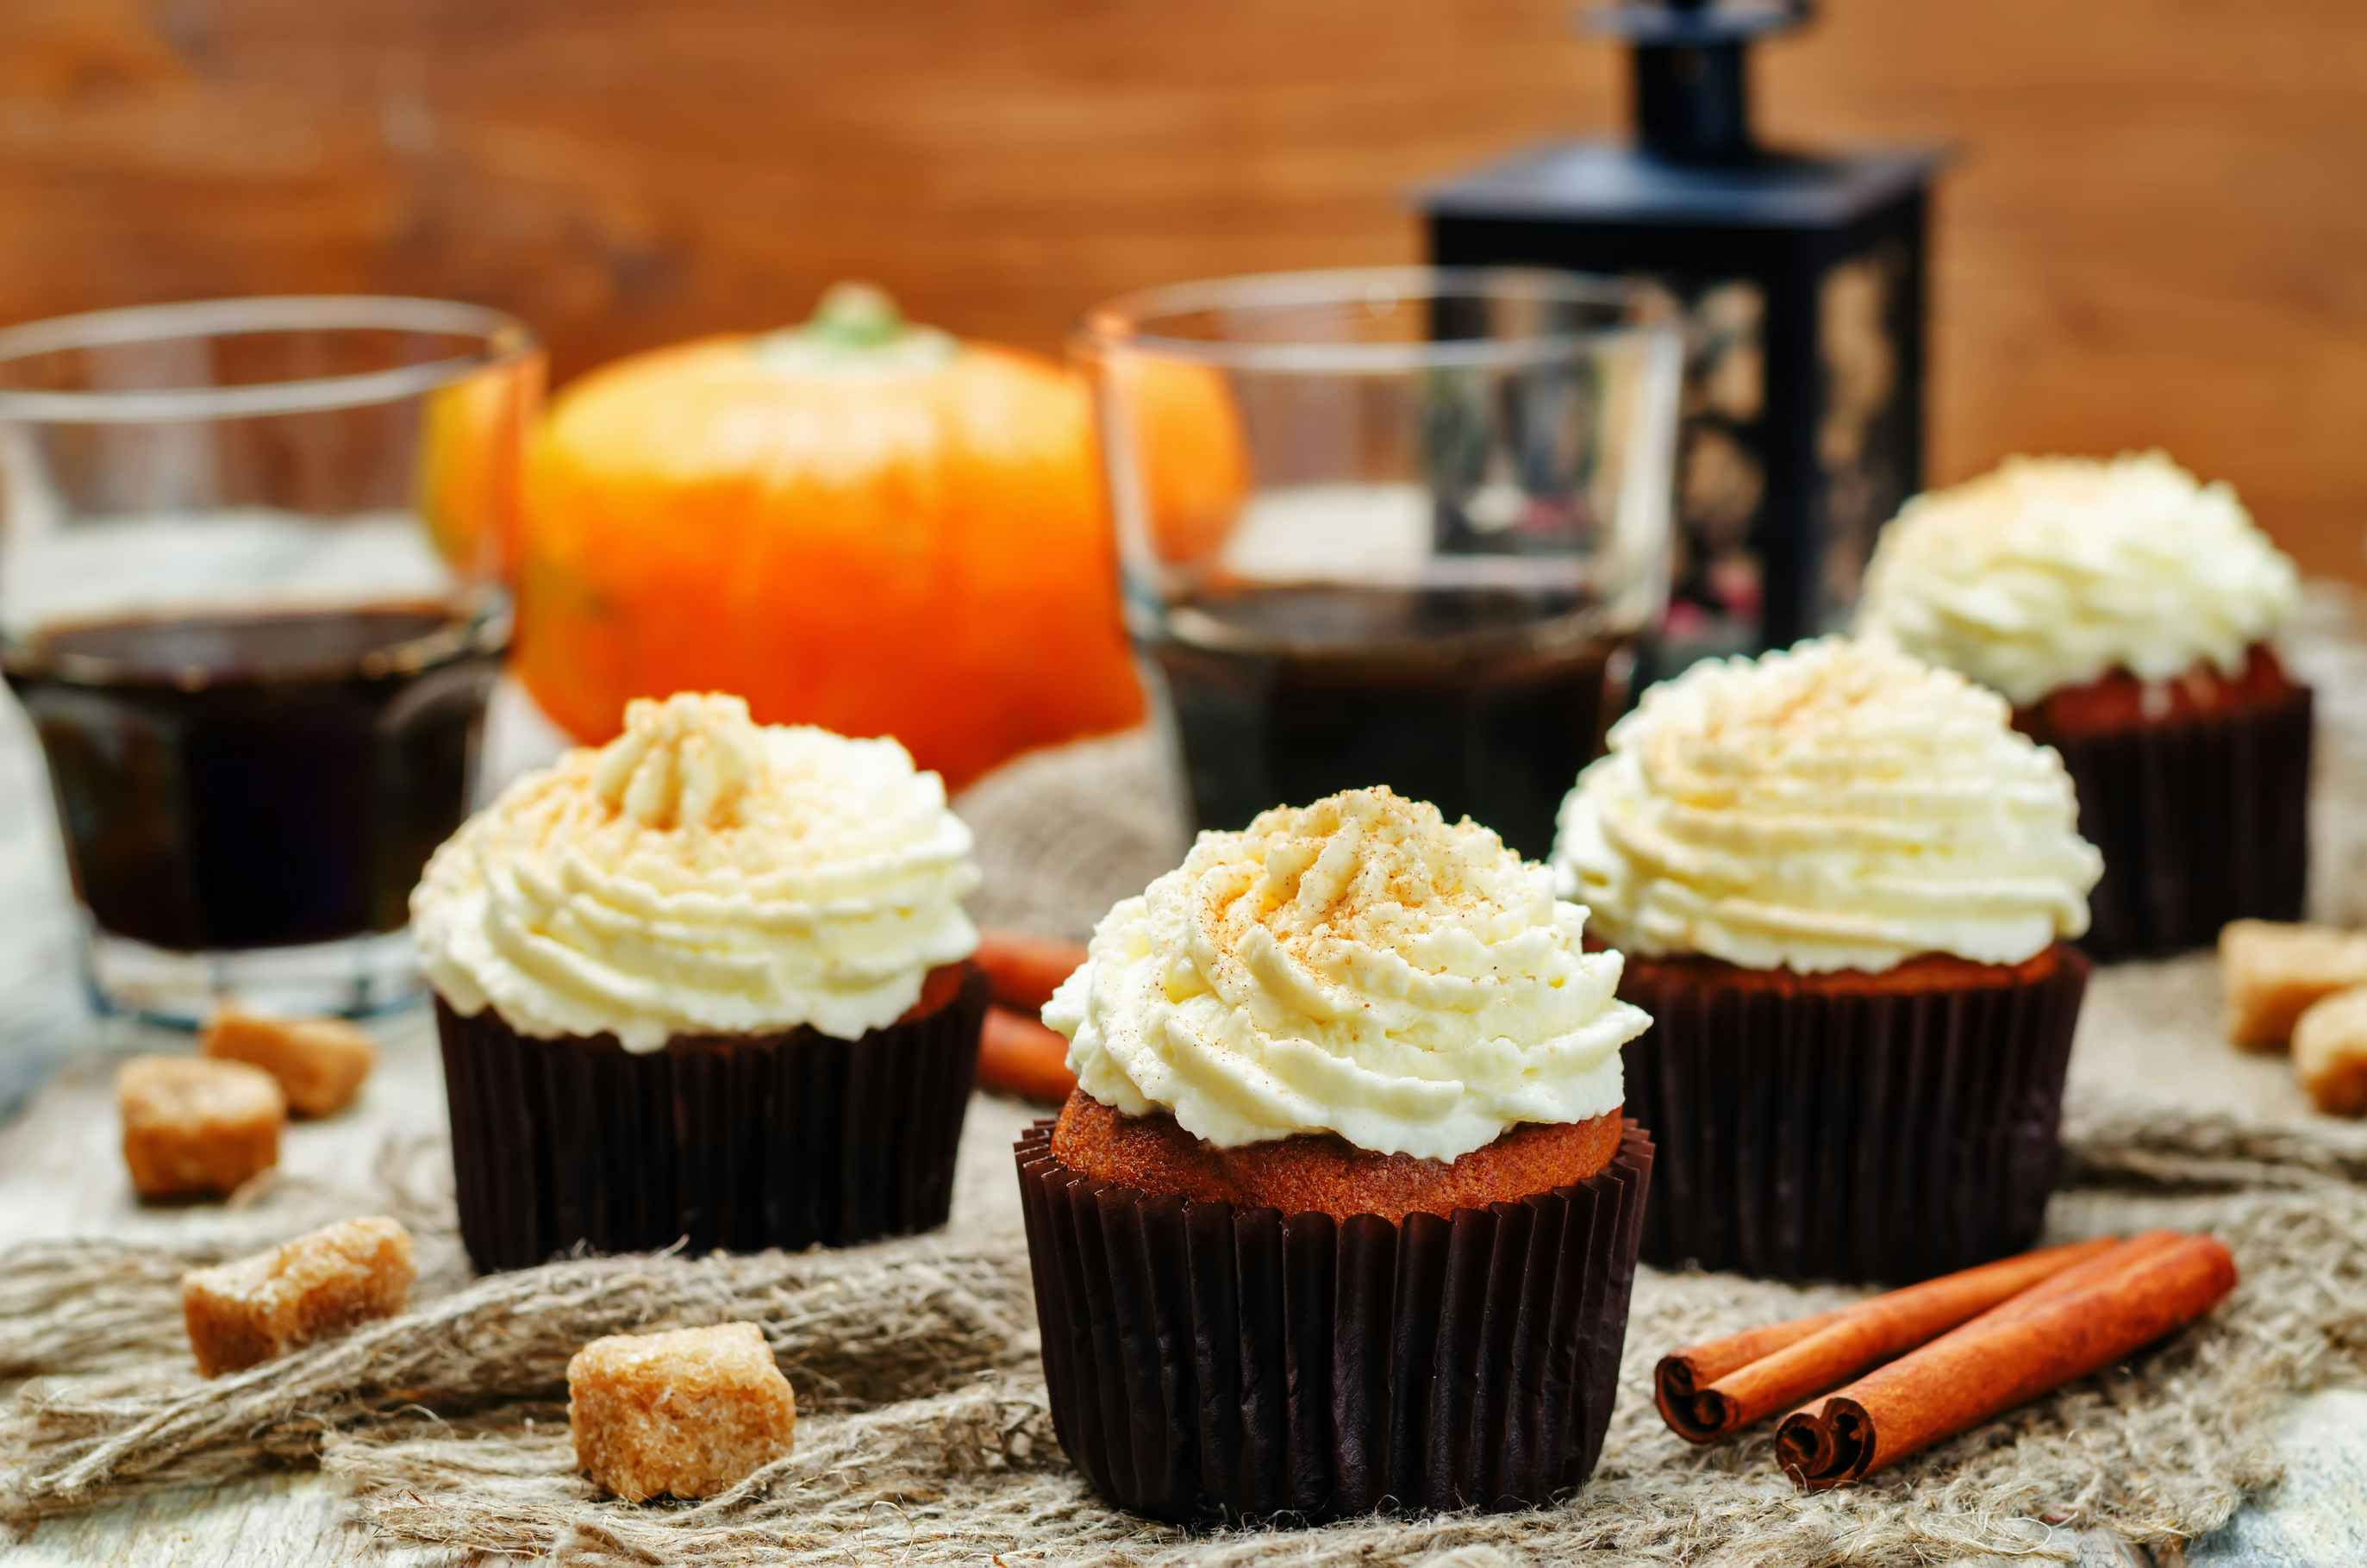 Pumpkin pie cupcakes on a table with drinks, cinnamon sticks, a pumpkin, and some crumbles.